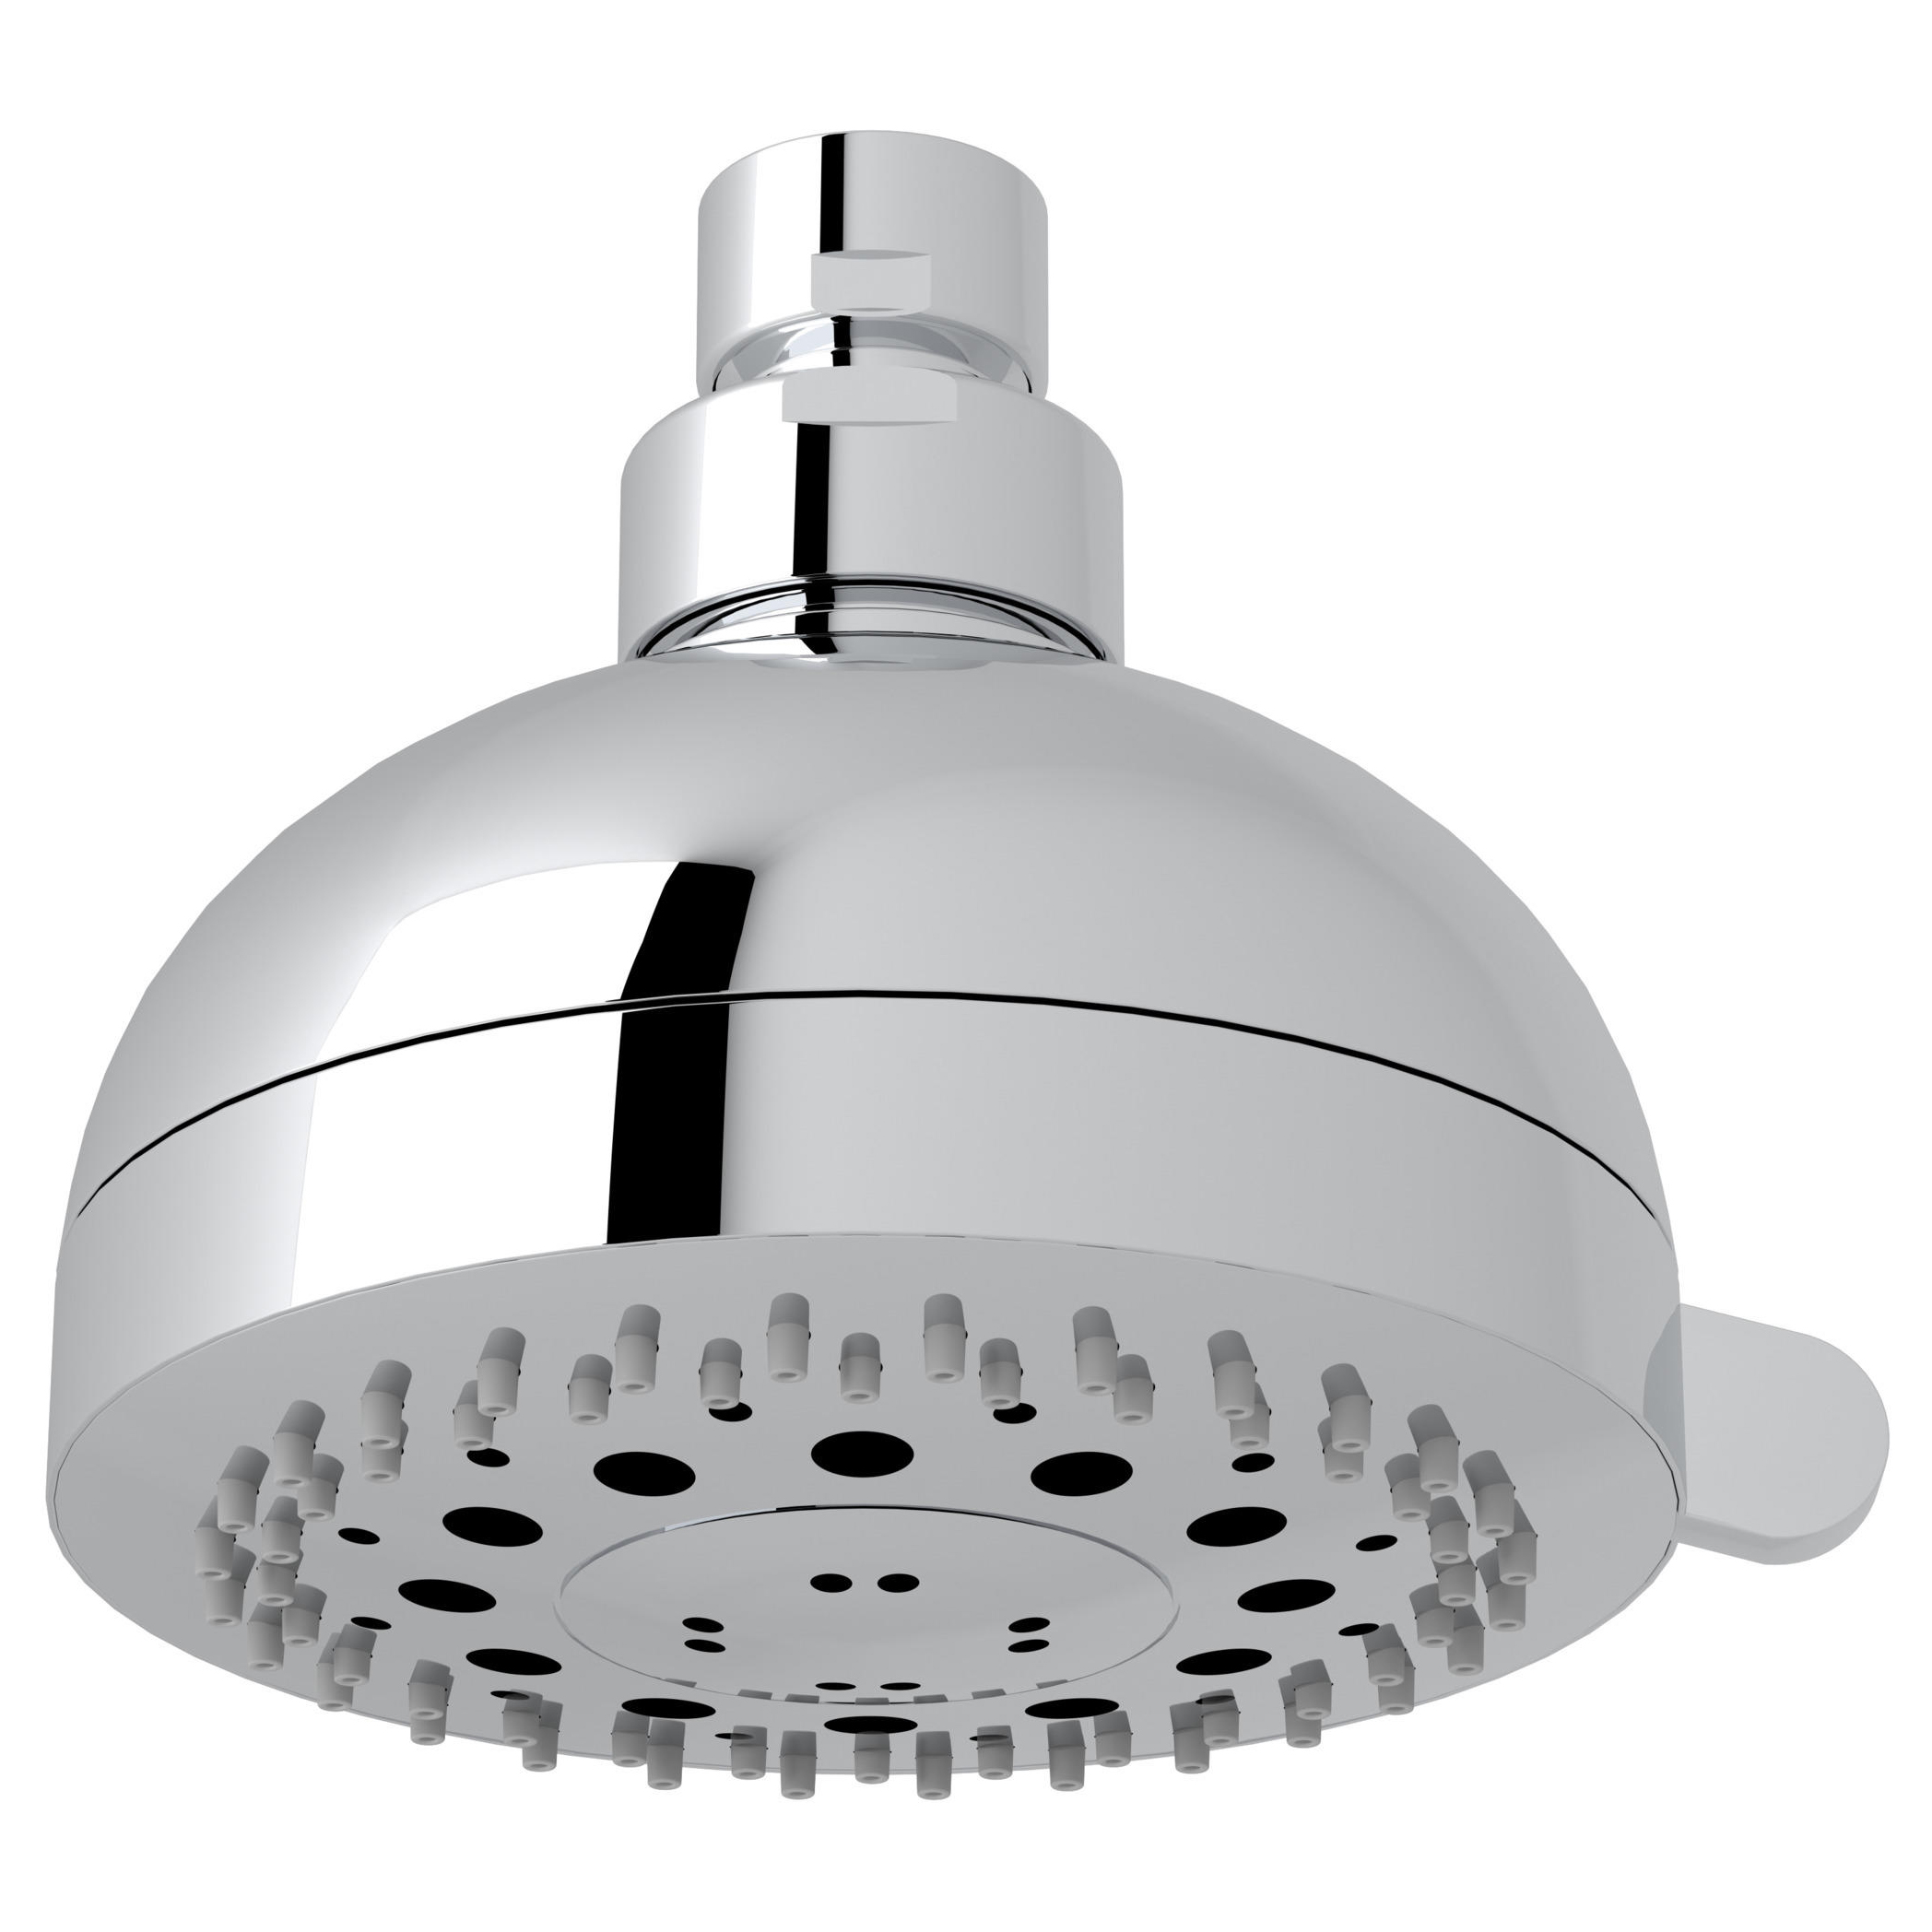 Rovato 4" 3-Function Showerhead in Polished Chrome, 1.8 gpm